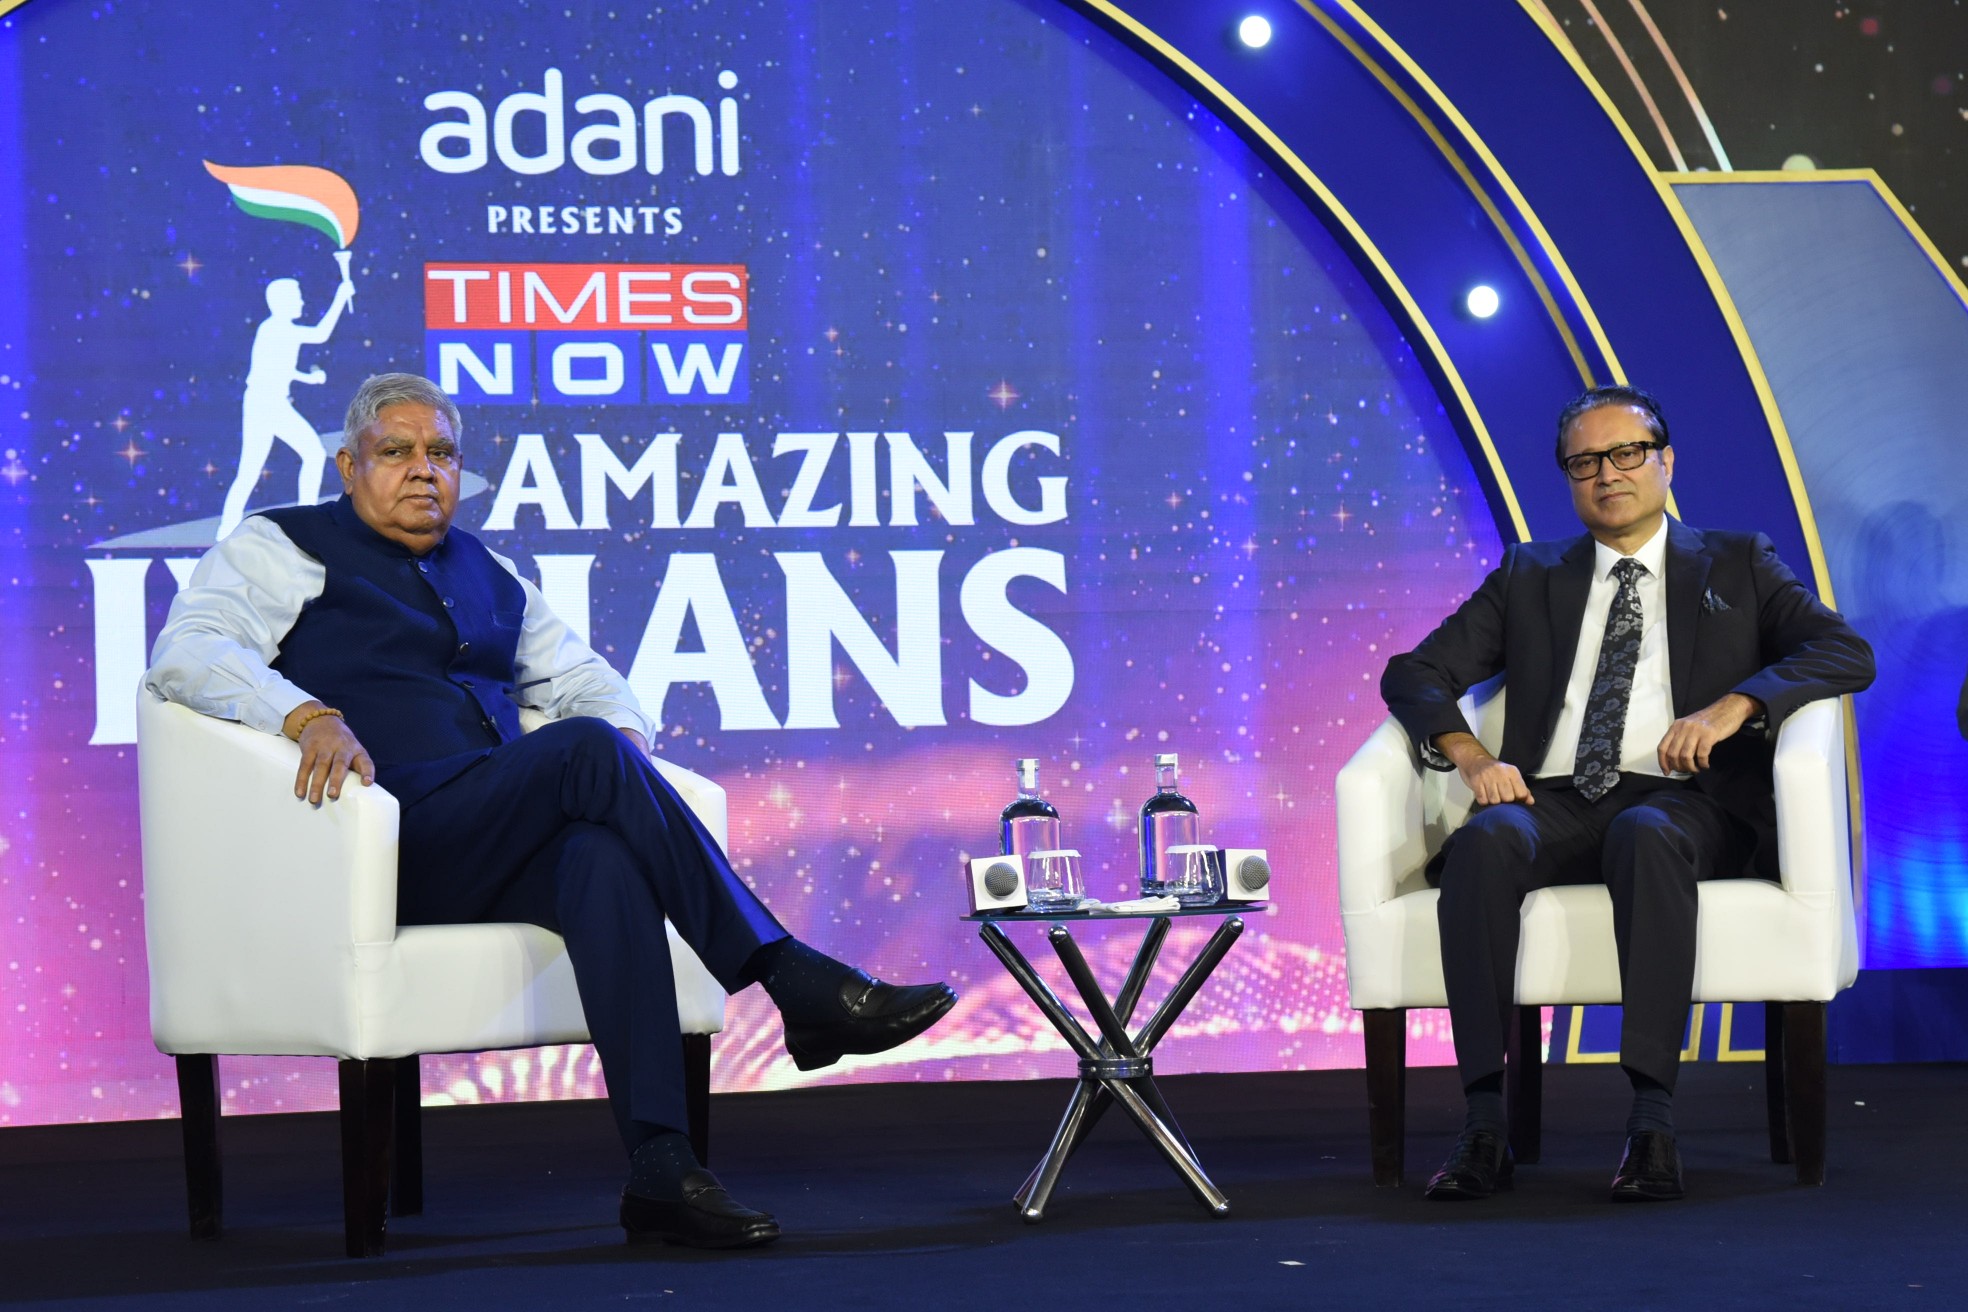 The Vice President, Shri Jagdeep Dhankhar at the Times Now Amazing Indians Awards 2022 ceremony in New Delhi on September 9, 2022.